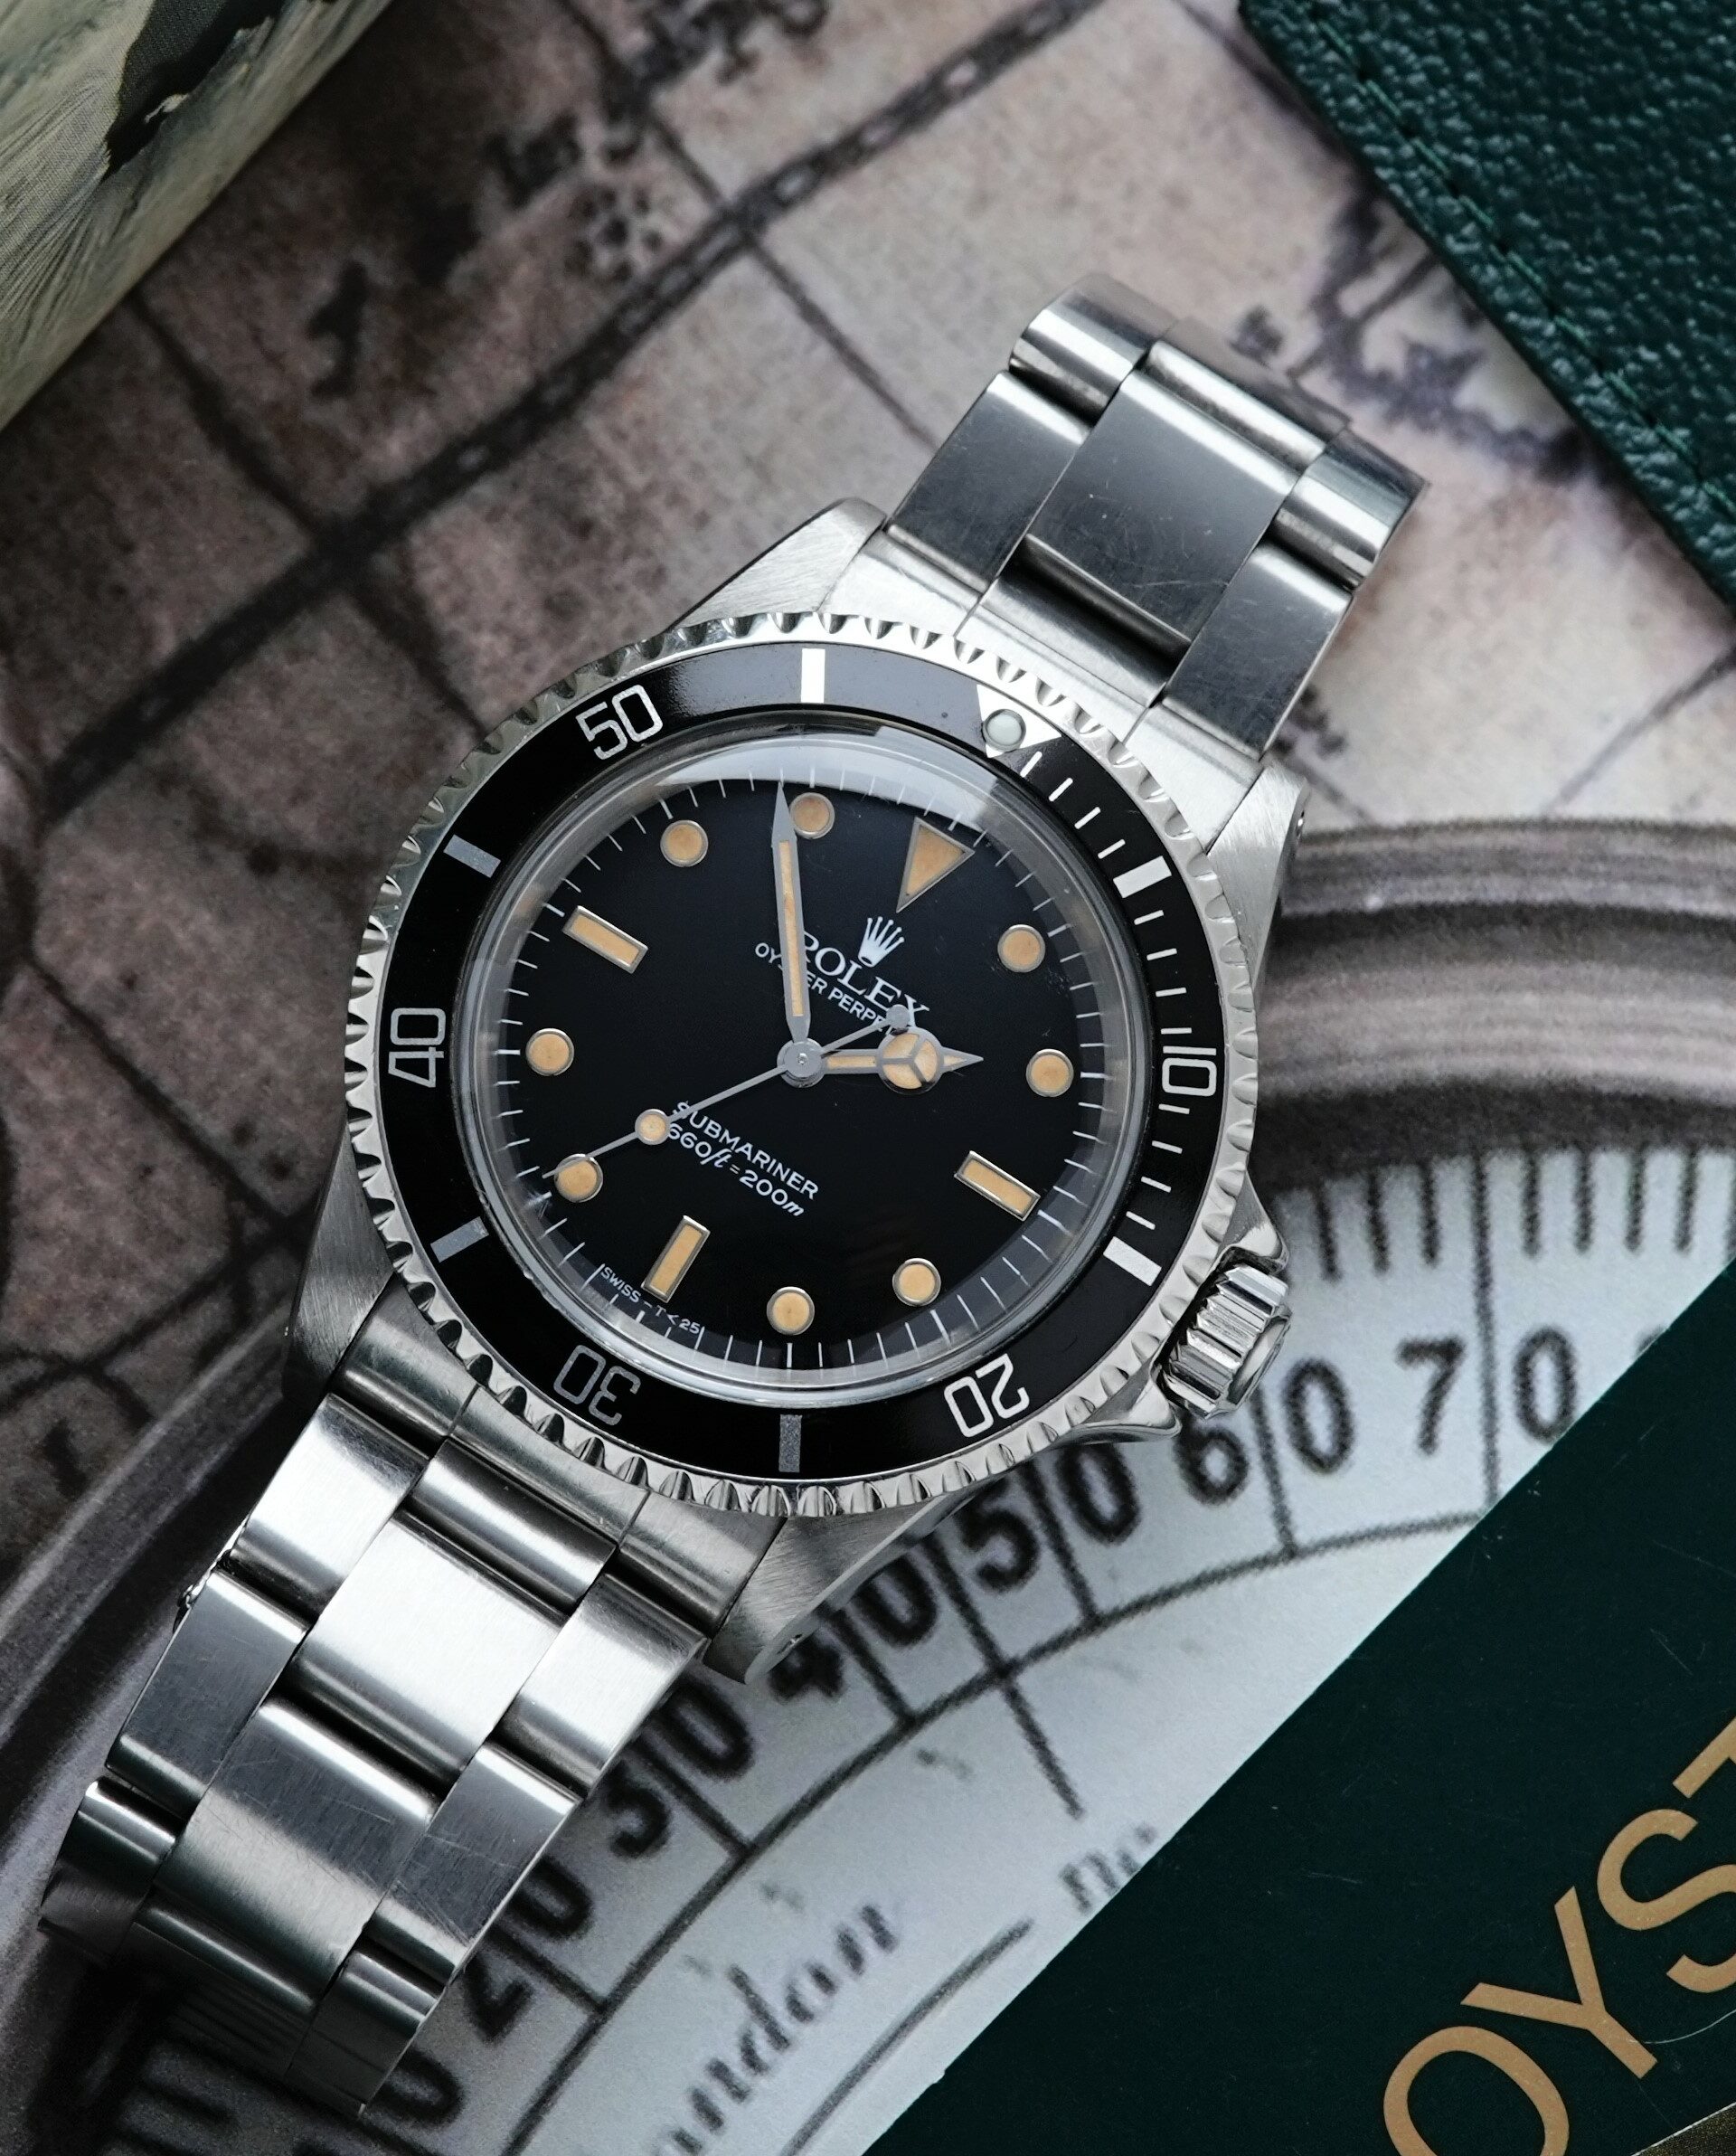 Rolex Submariner 5513 1979 Mark 3. Spider dial featured with unique background and original papers.